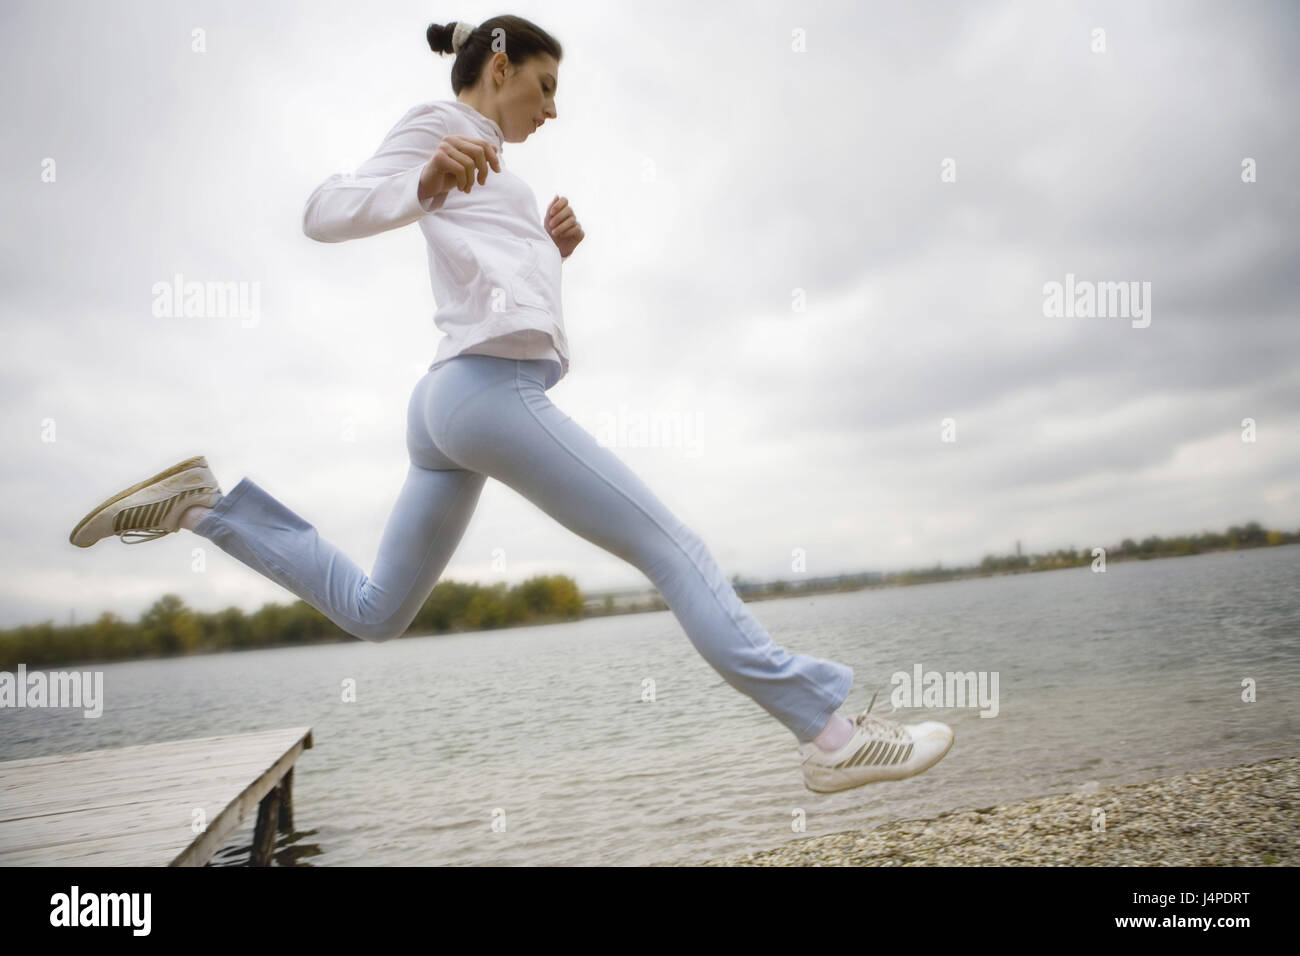 Woman, young, jog, lakeside, crack, at the side, model released, Stock Photo